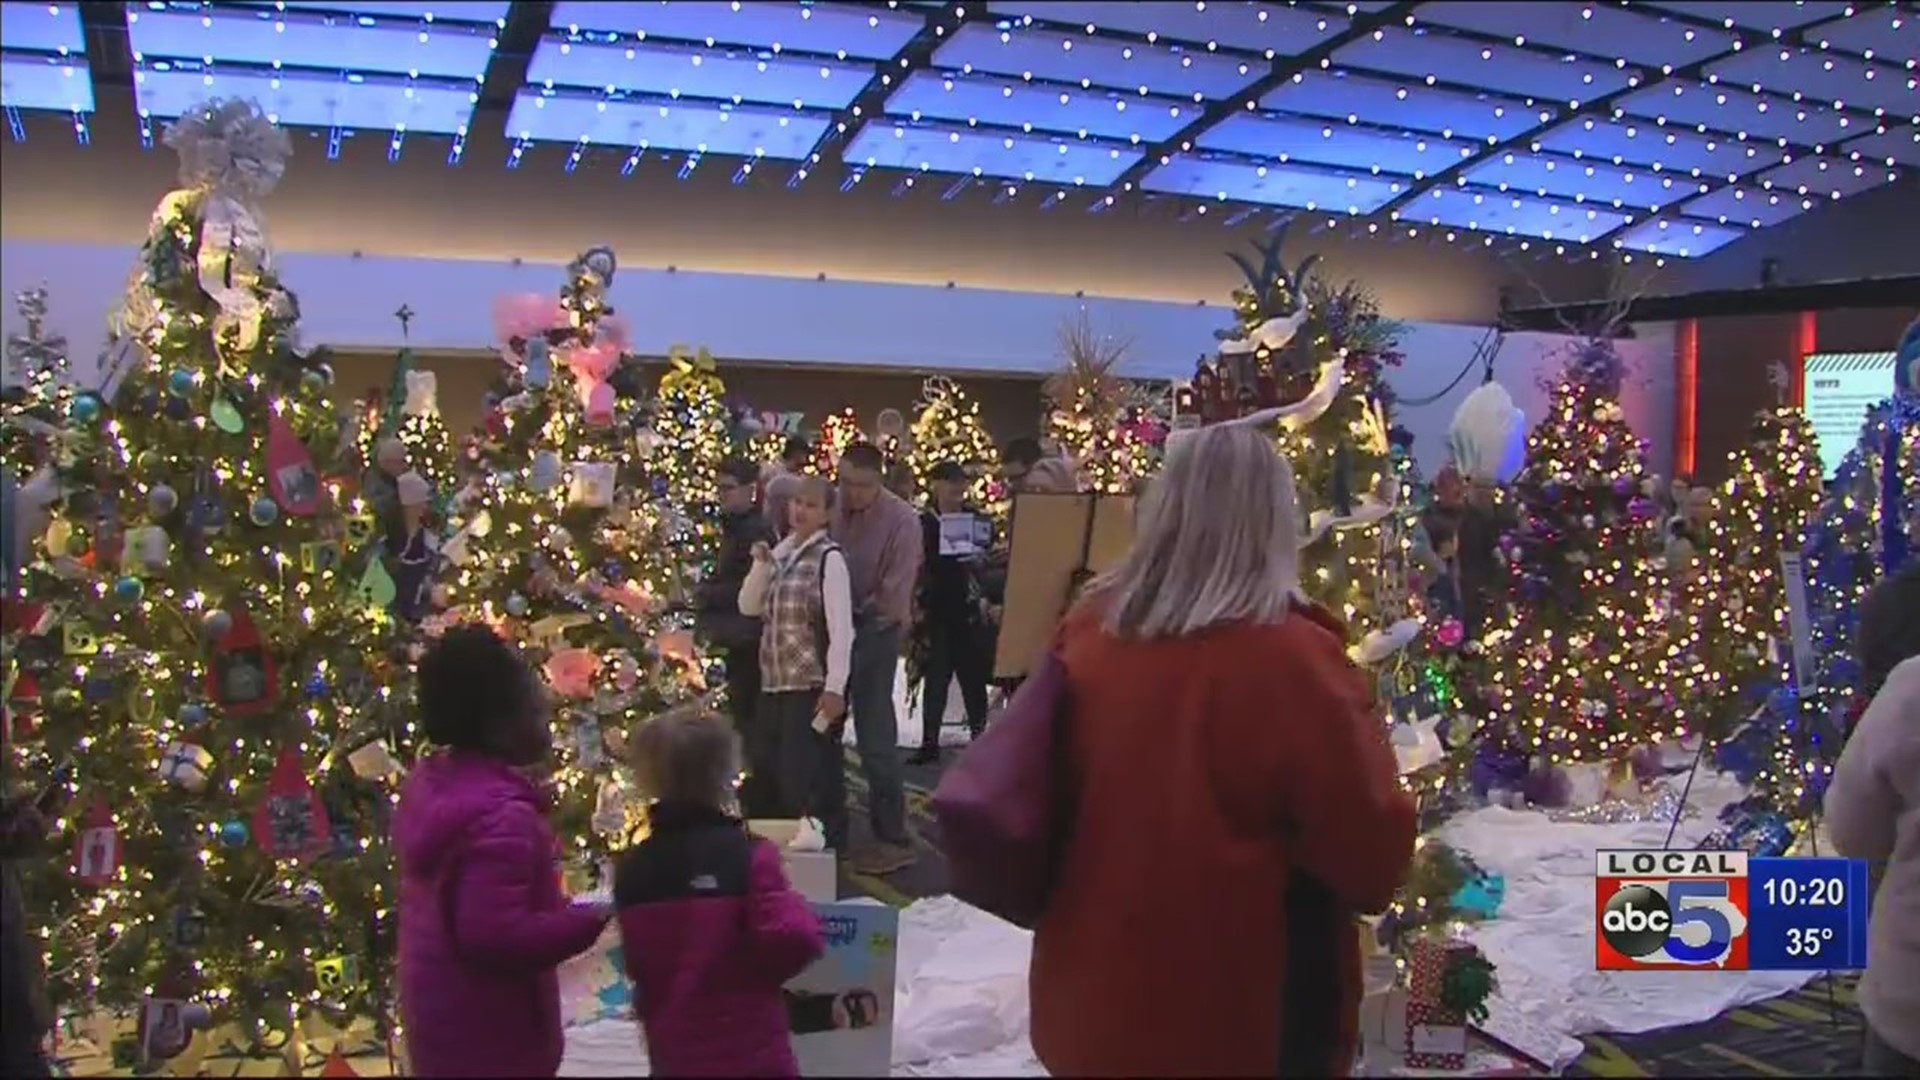 Festival of Trees now in its 35th year